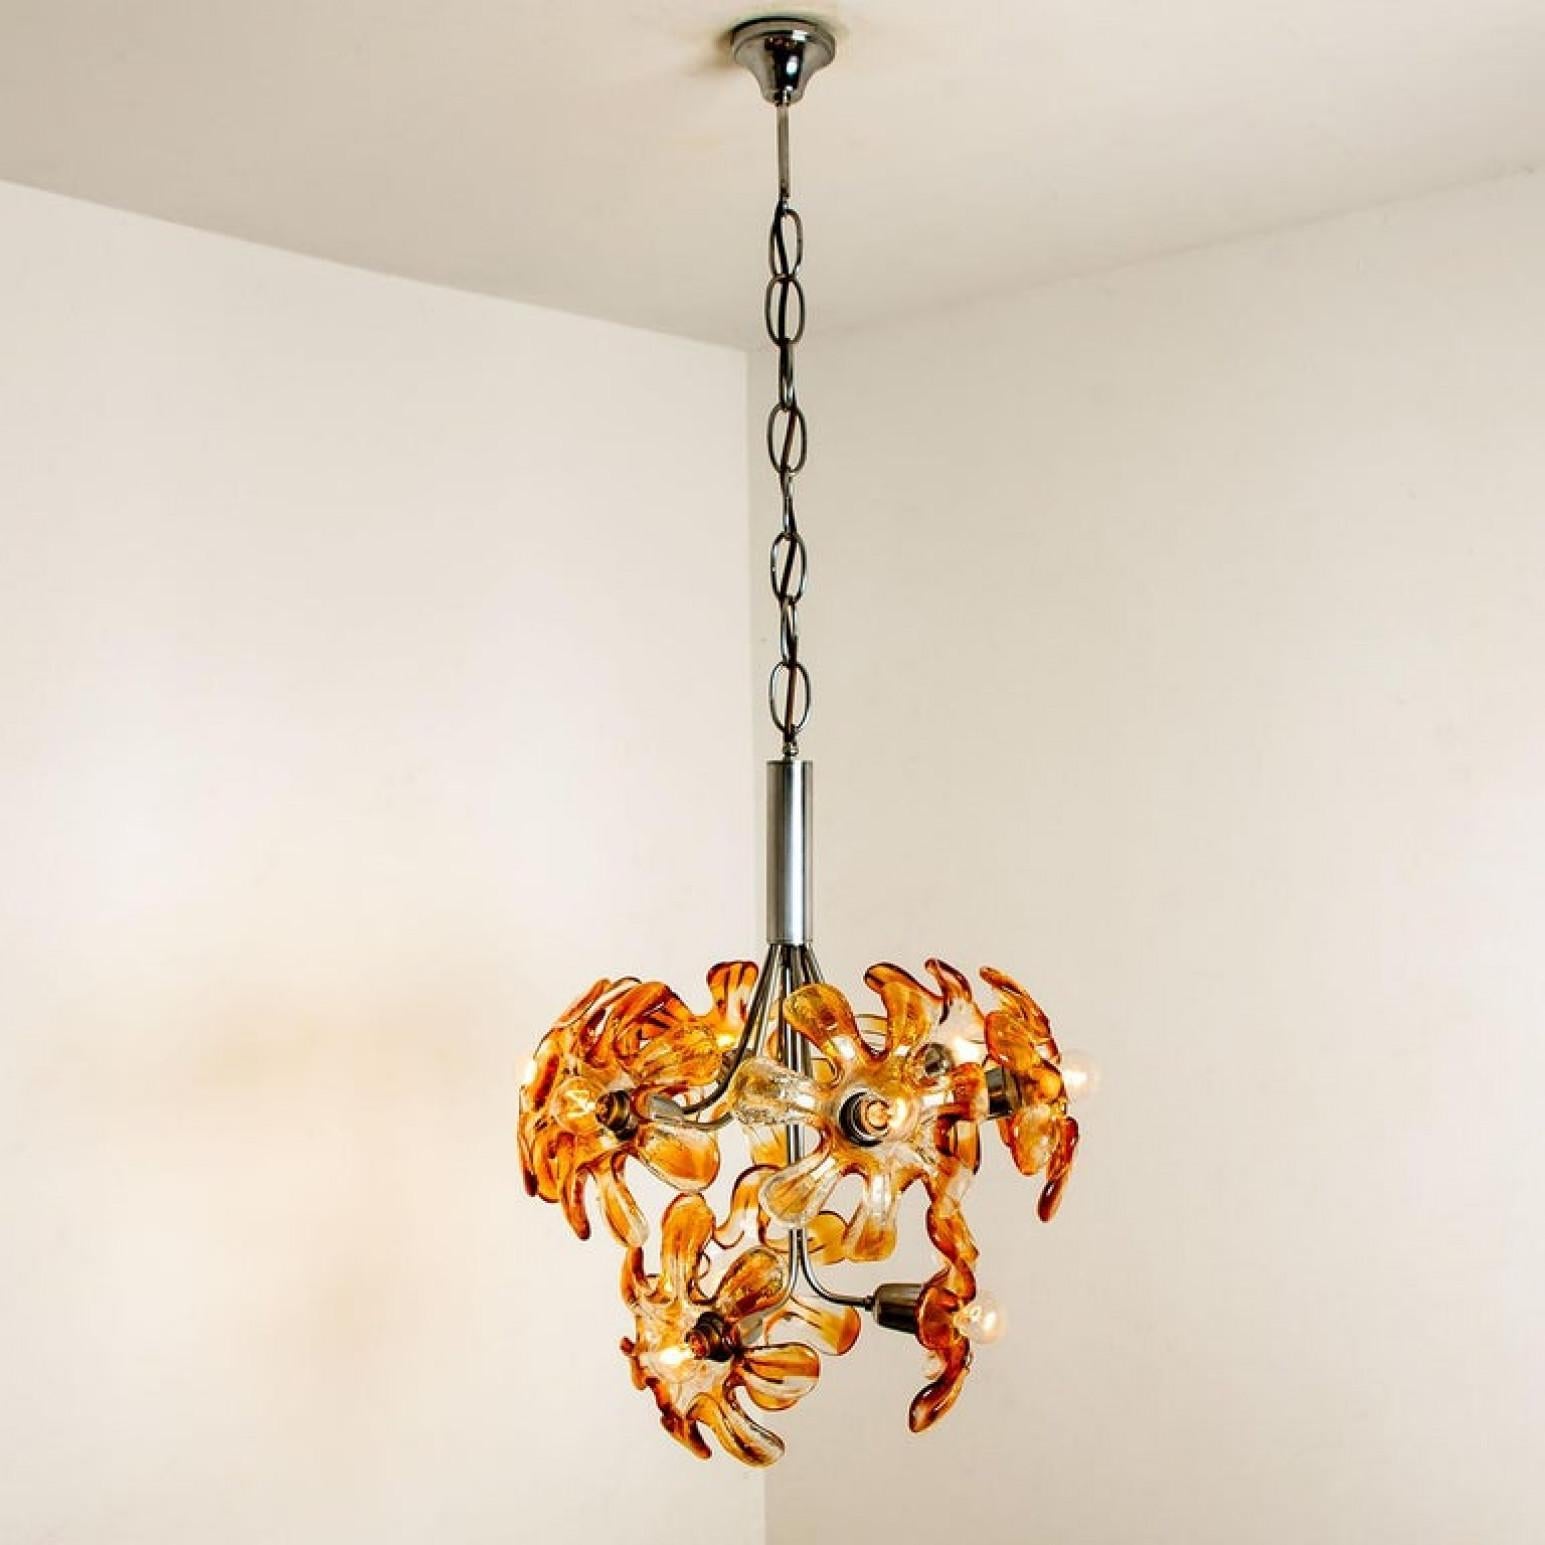 Elegant Murano chandelier by Mazzega, 1960s. Chrome chain and hardware. Amber and clear resembles flowers. The chandelier illuminates beautifully on wall and ceiling. Measures: Ø 19 inch/ 48 cm, 24 inch H 60 cm

Cleaned well wired and ready to use.